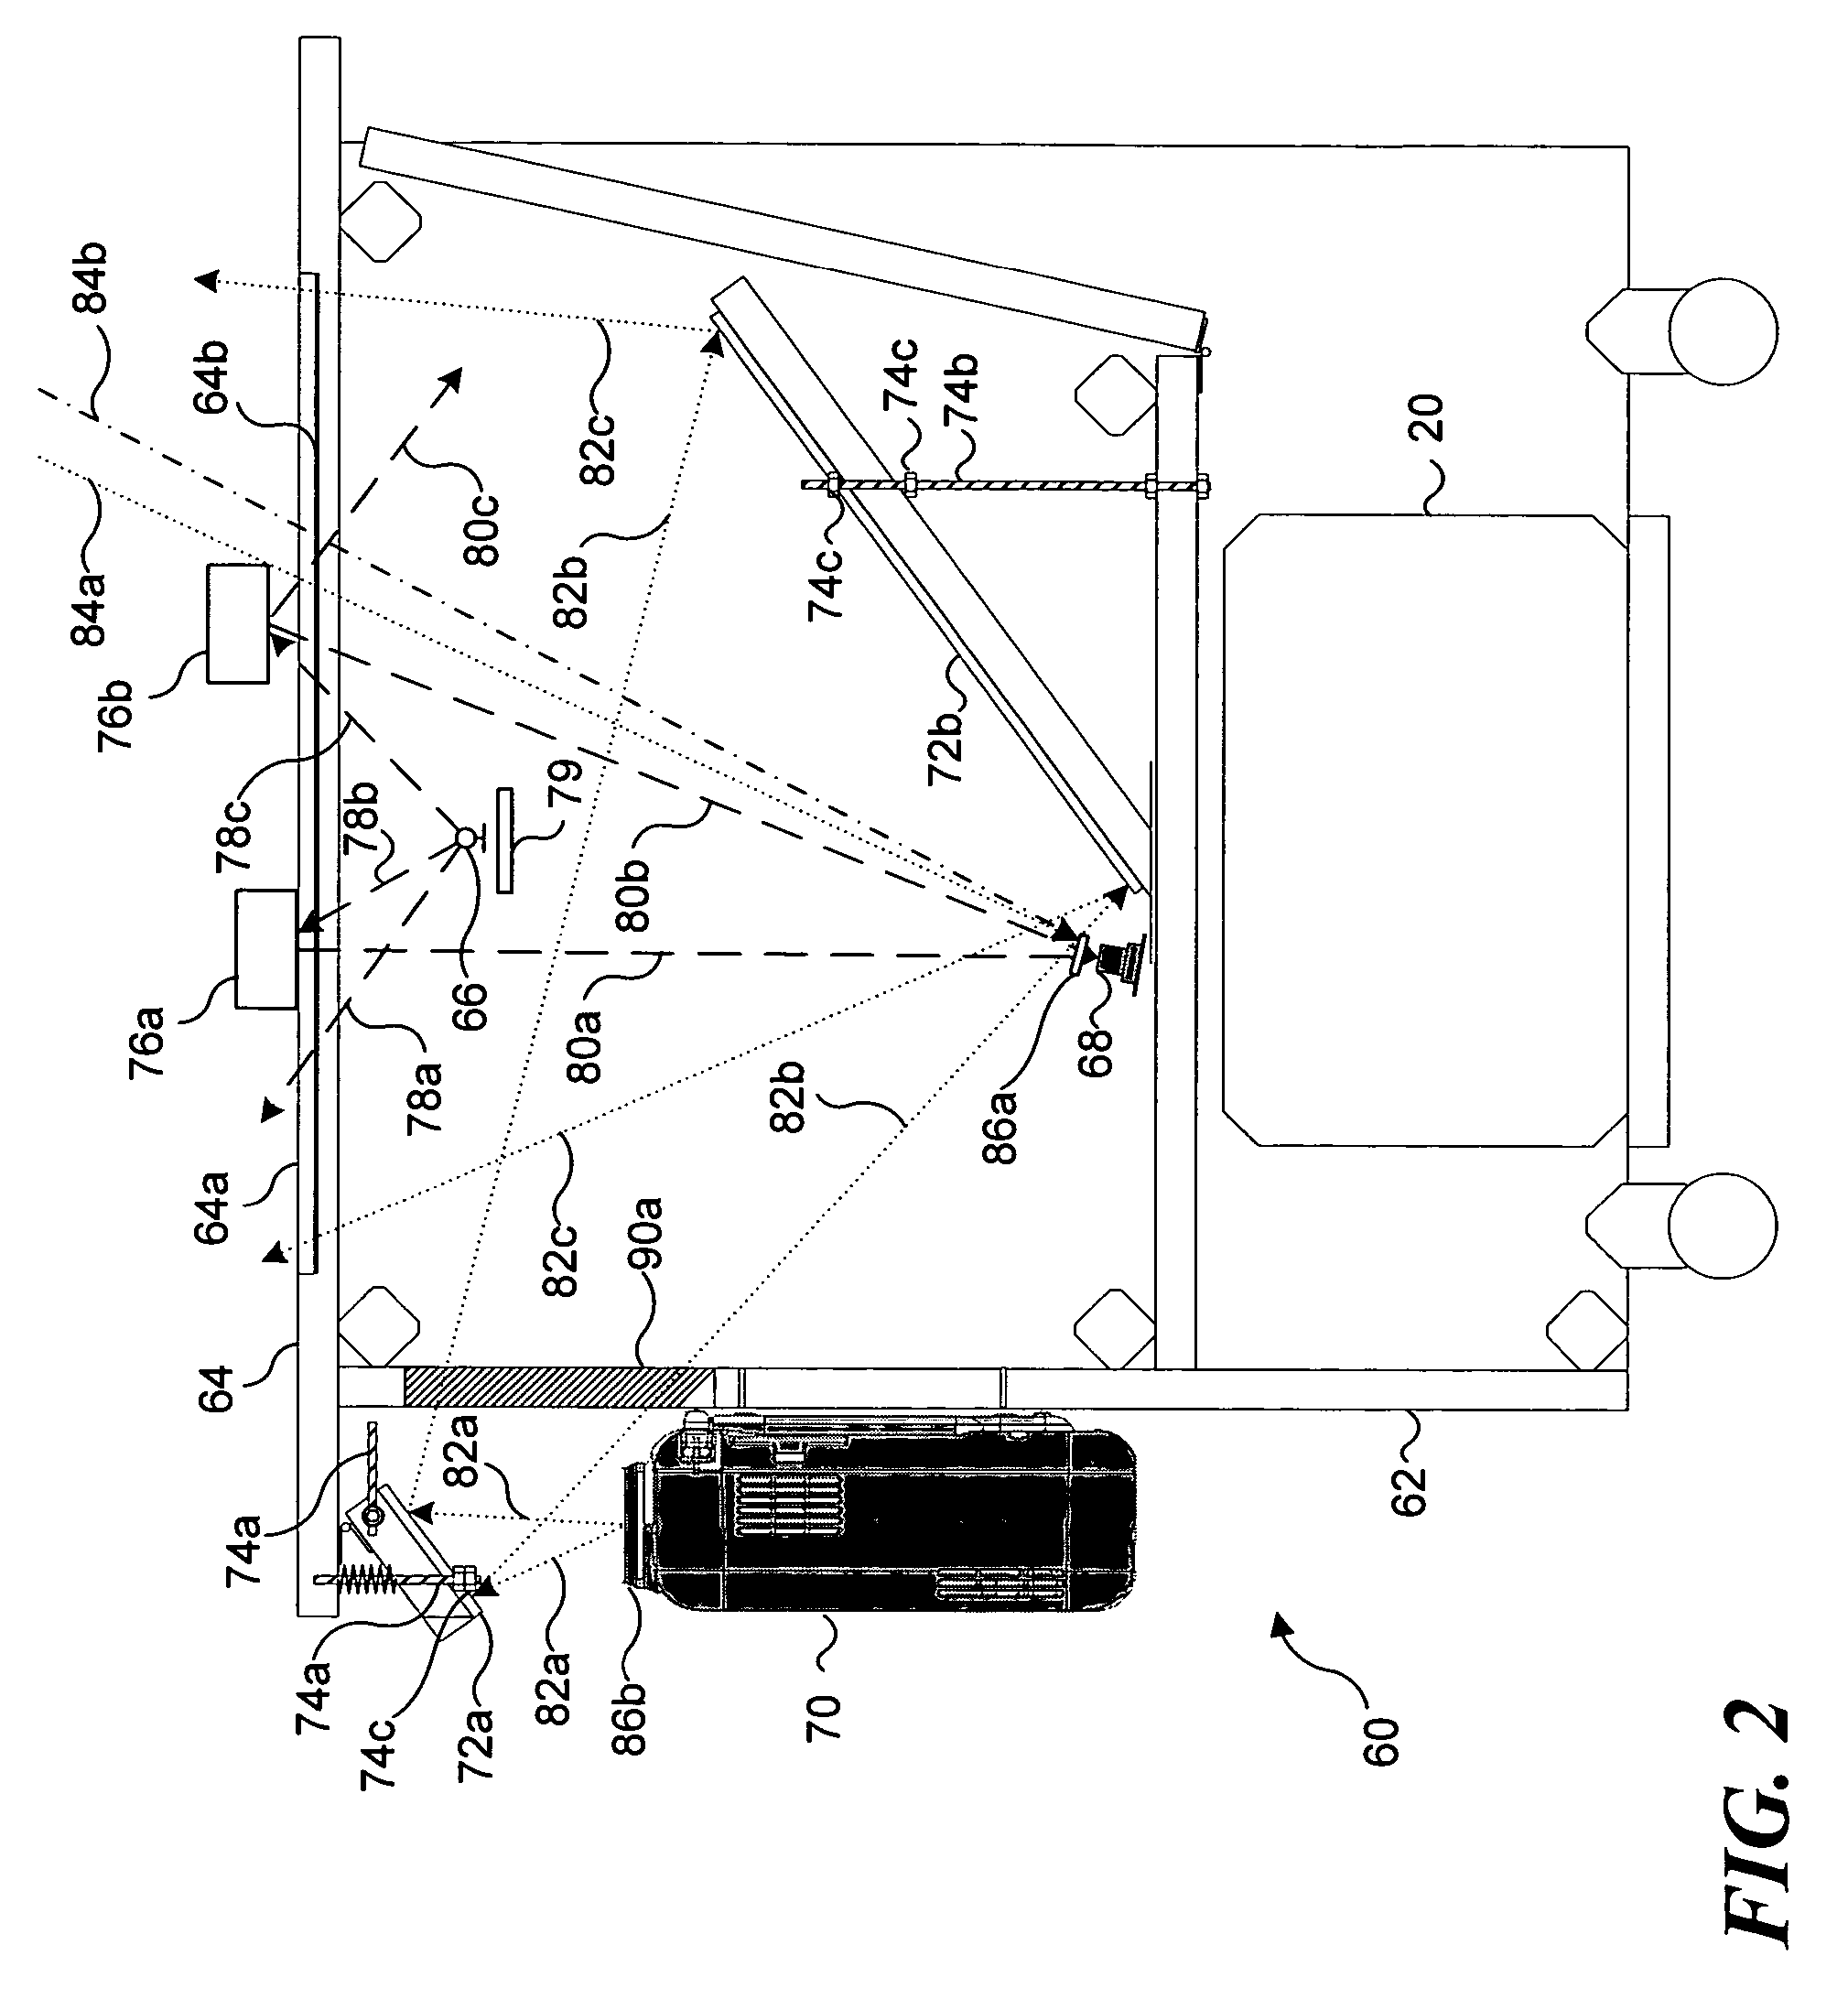 System and method for reducing latency in display of computer-generated graphics